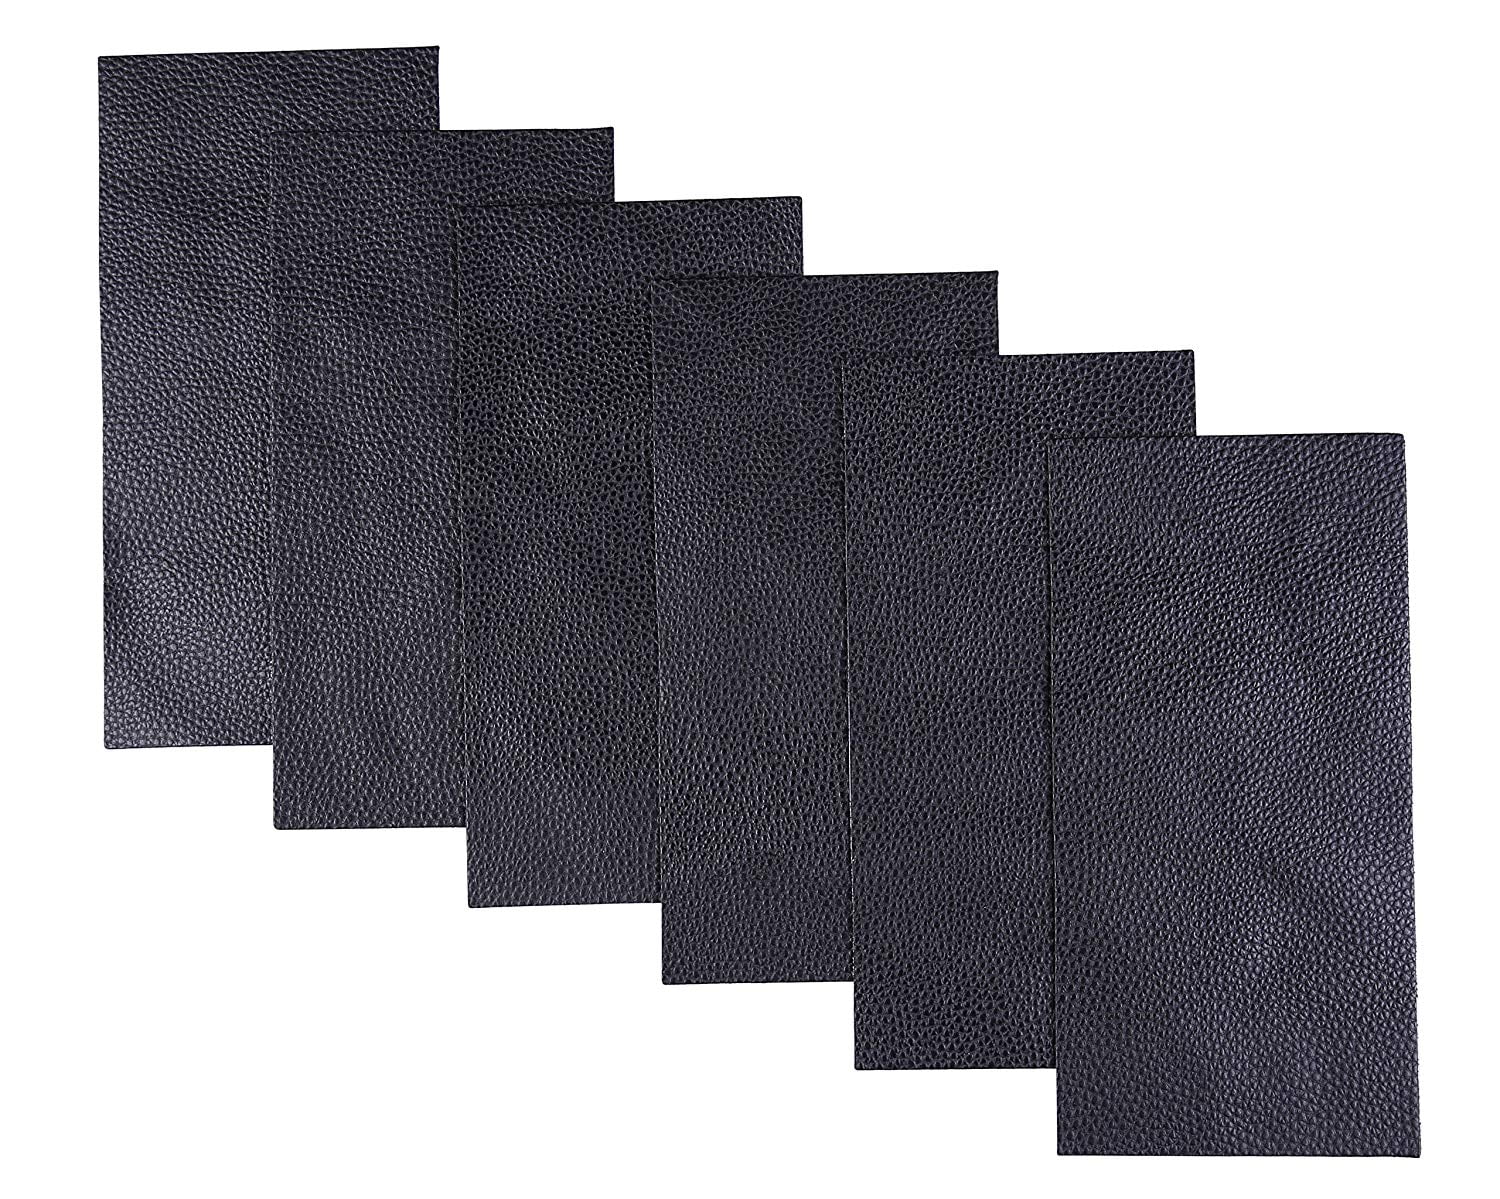 6 Pcs Leather Repair Patch Pleather, Leather Furniture Repair Kits